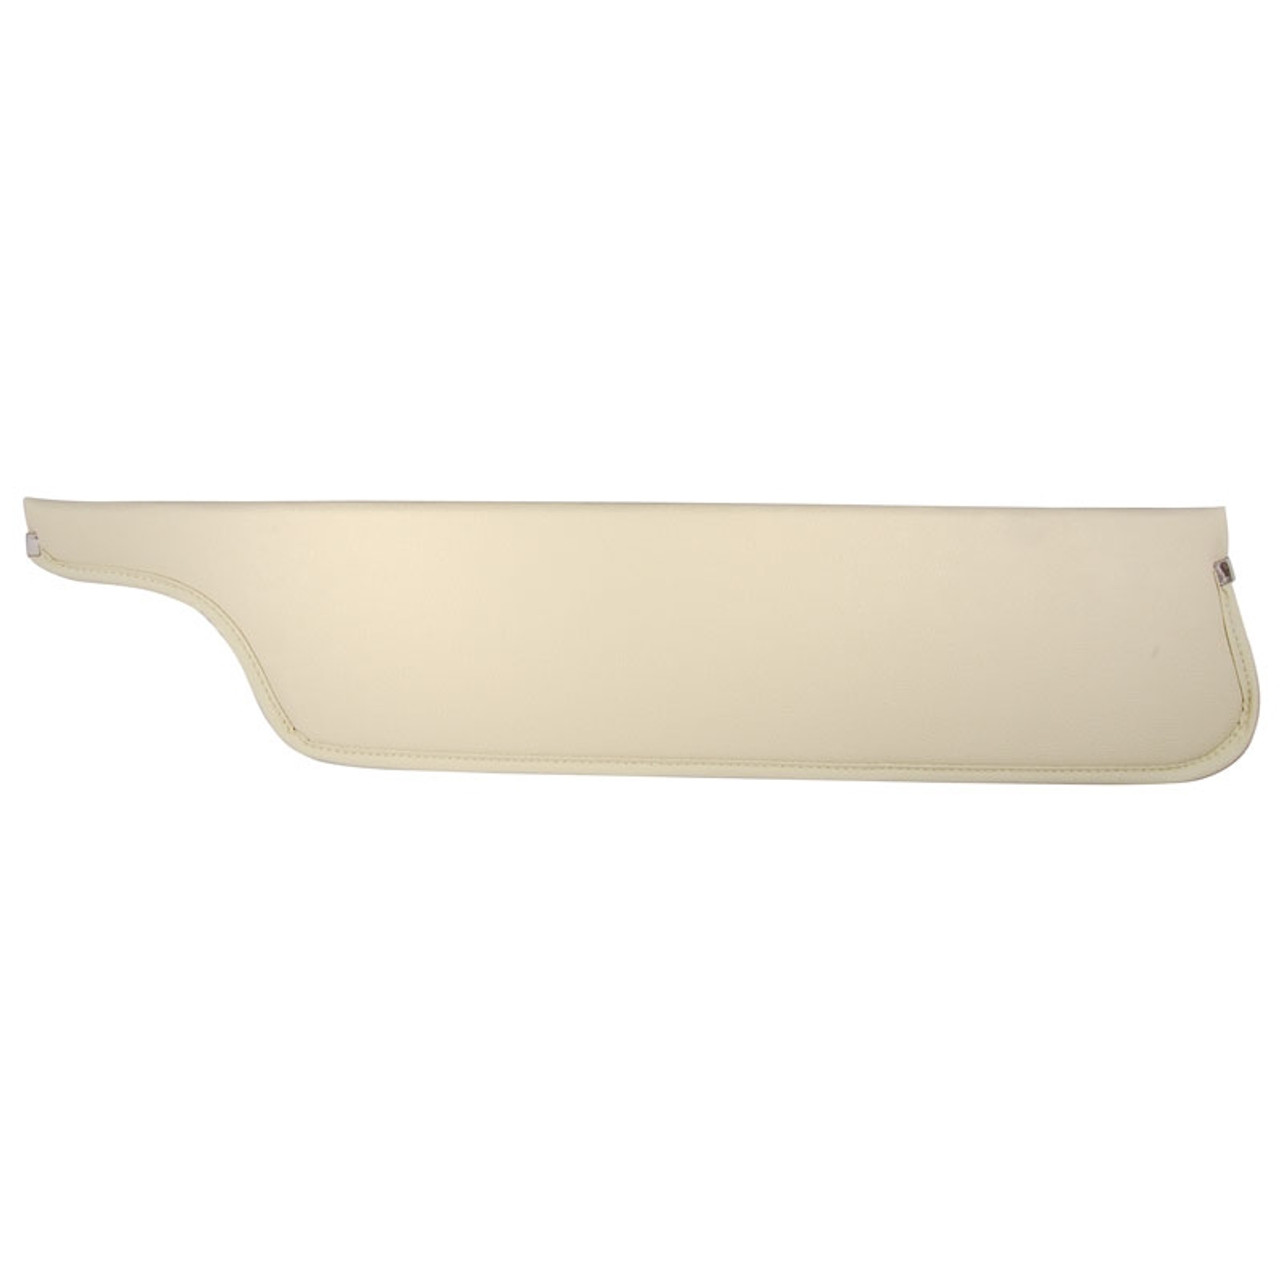 1973-79 Ford Truck Special Order Sunvisor Pads, pr. (also 1978-79 Bronco)